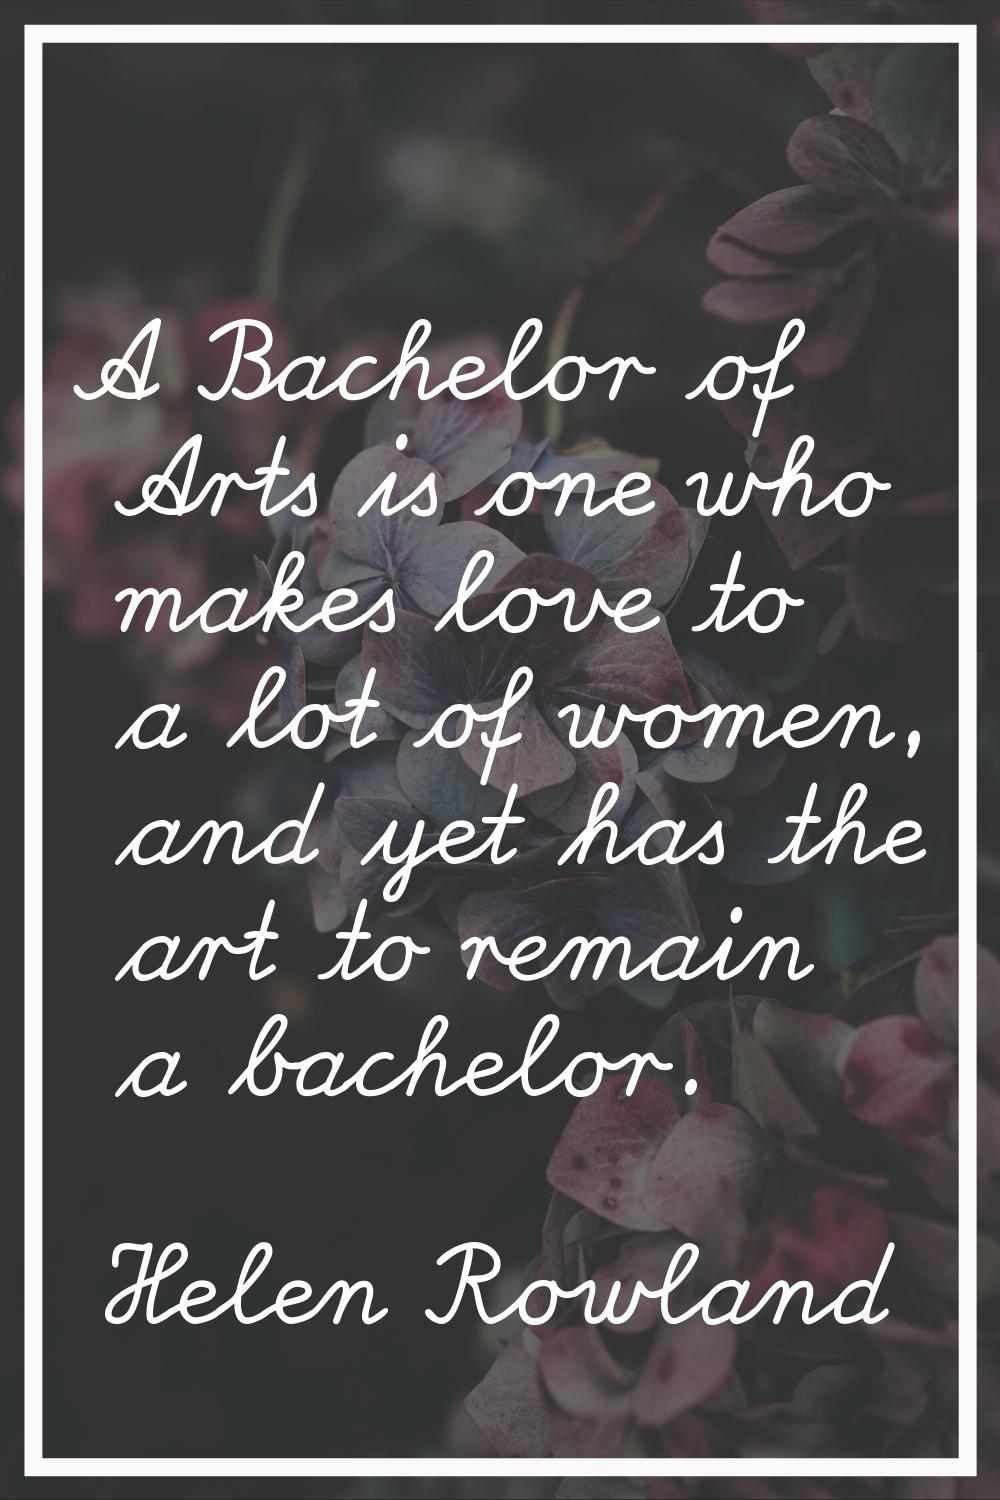 A Bachelor of Arts is one who makes love to a lot of women, and yet has the art to remain a bachelo